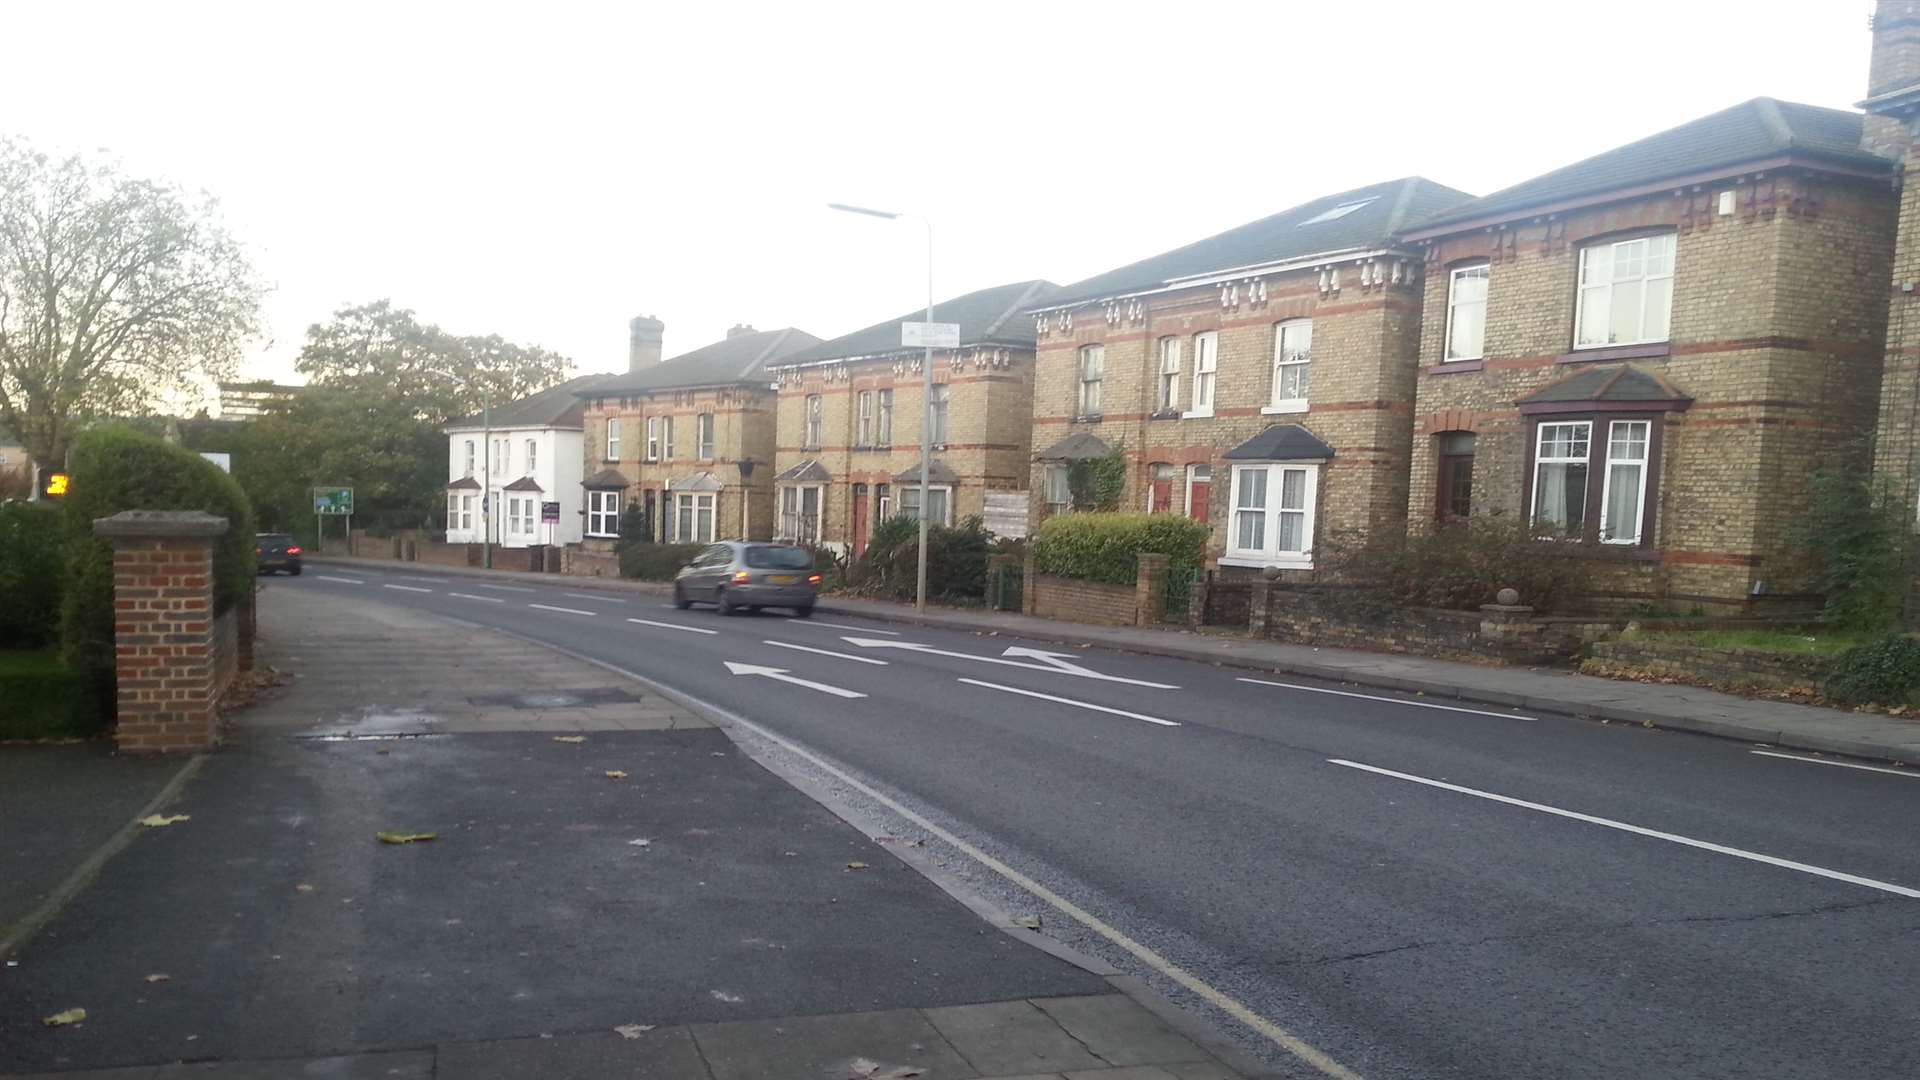 College Road, Maidstone, where a woman was arrested for brothel offences